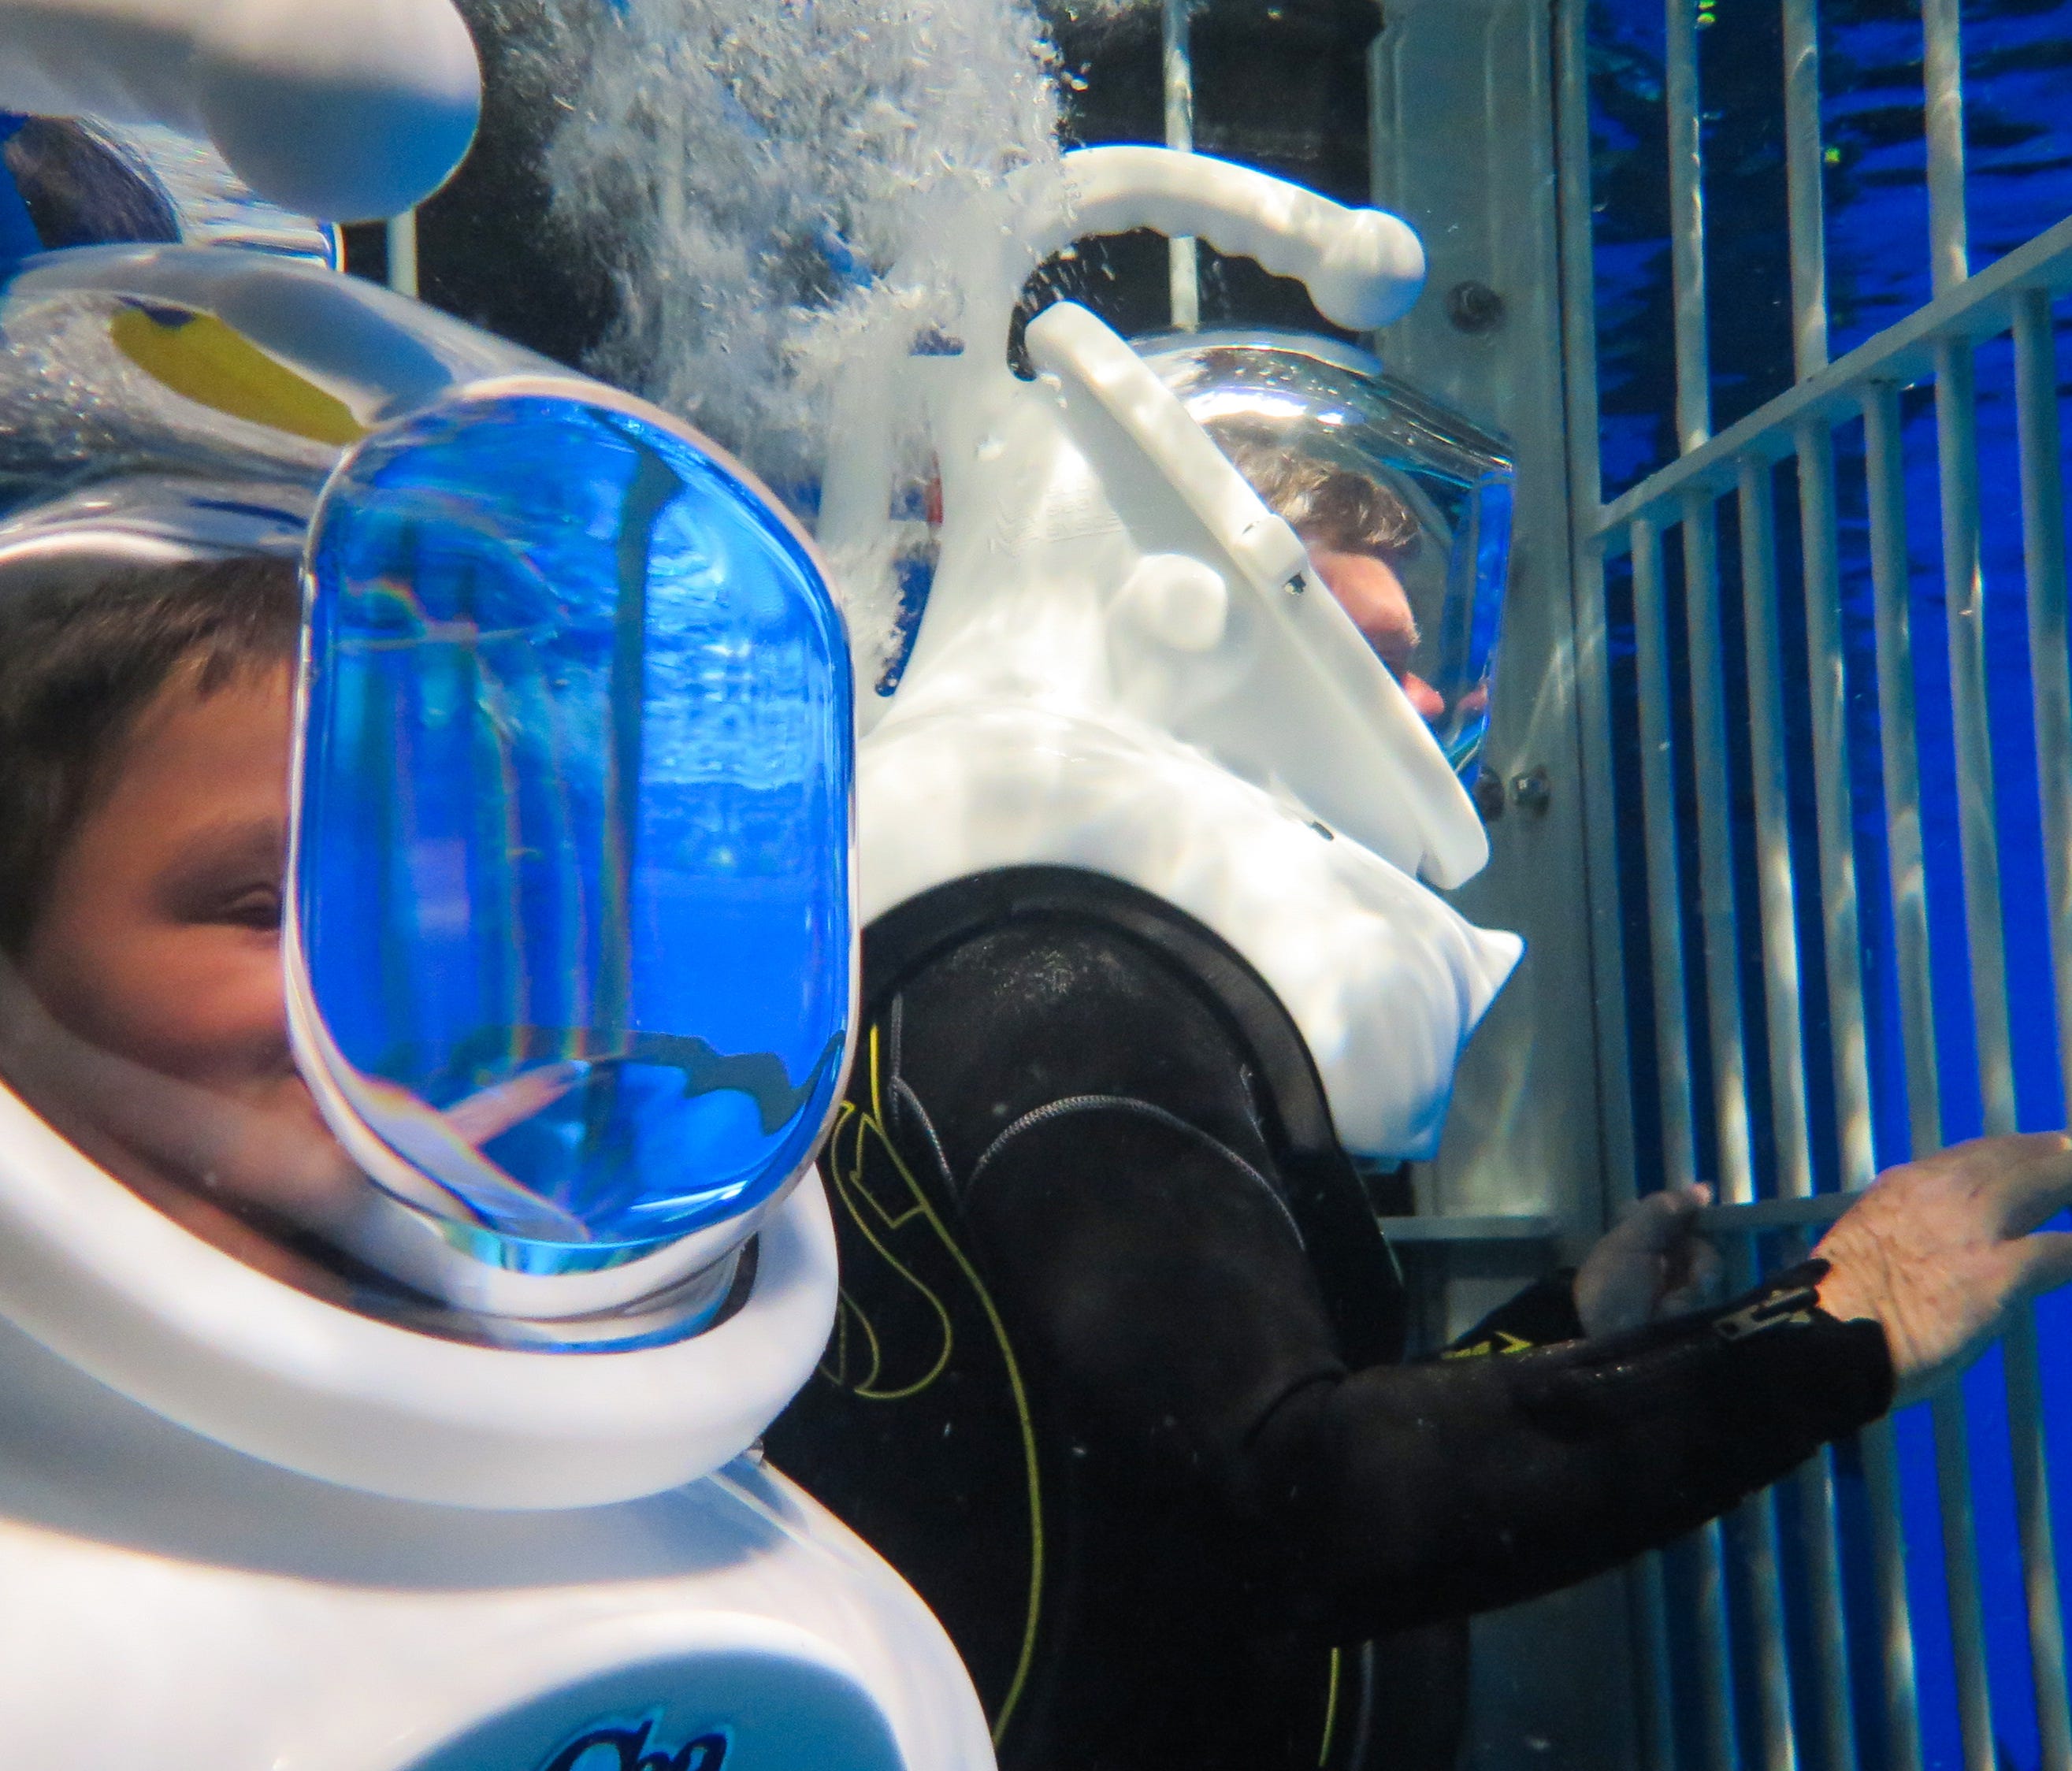 News-Leader reporter Wes Johnson (right) tries out Wonders of Wildlife's newest attraction, the Out To Sea Shark Dive, where visitors don wetsuits, diving helmets and climb inside a shark cage that takes you into the aquarium's shark tank.